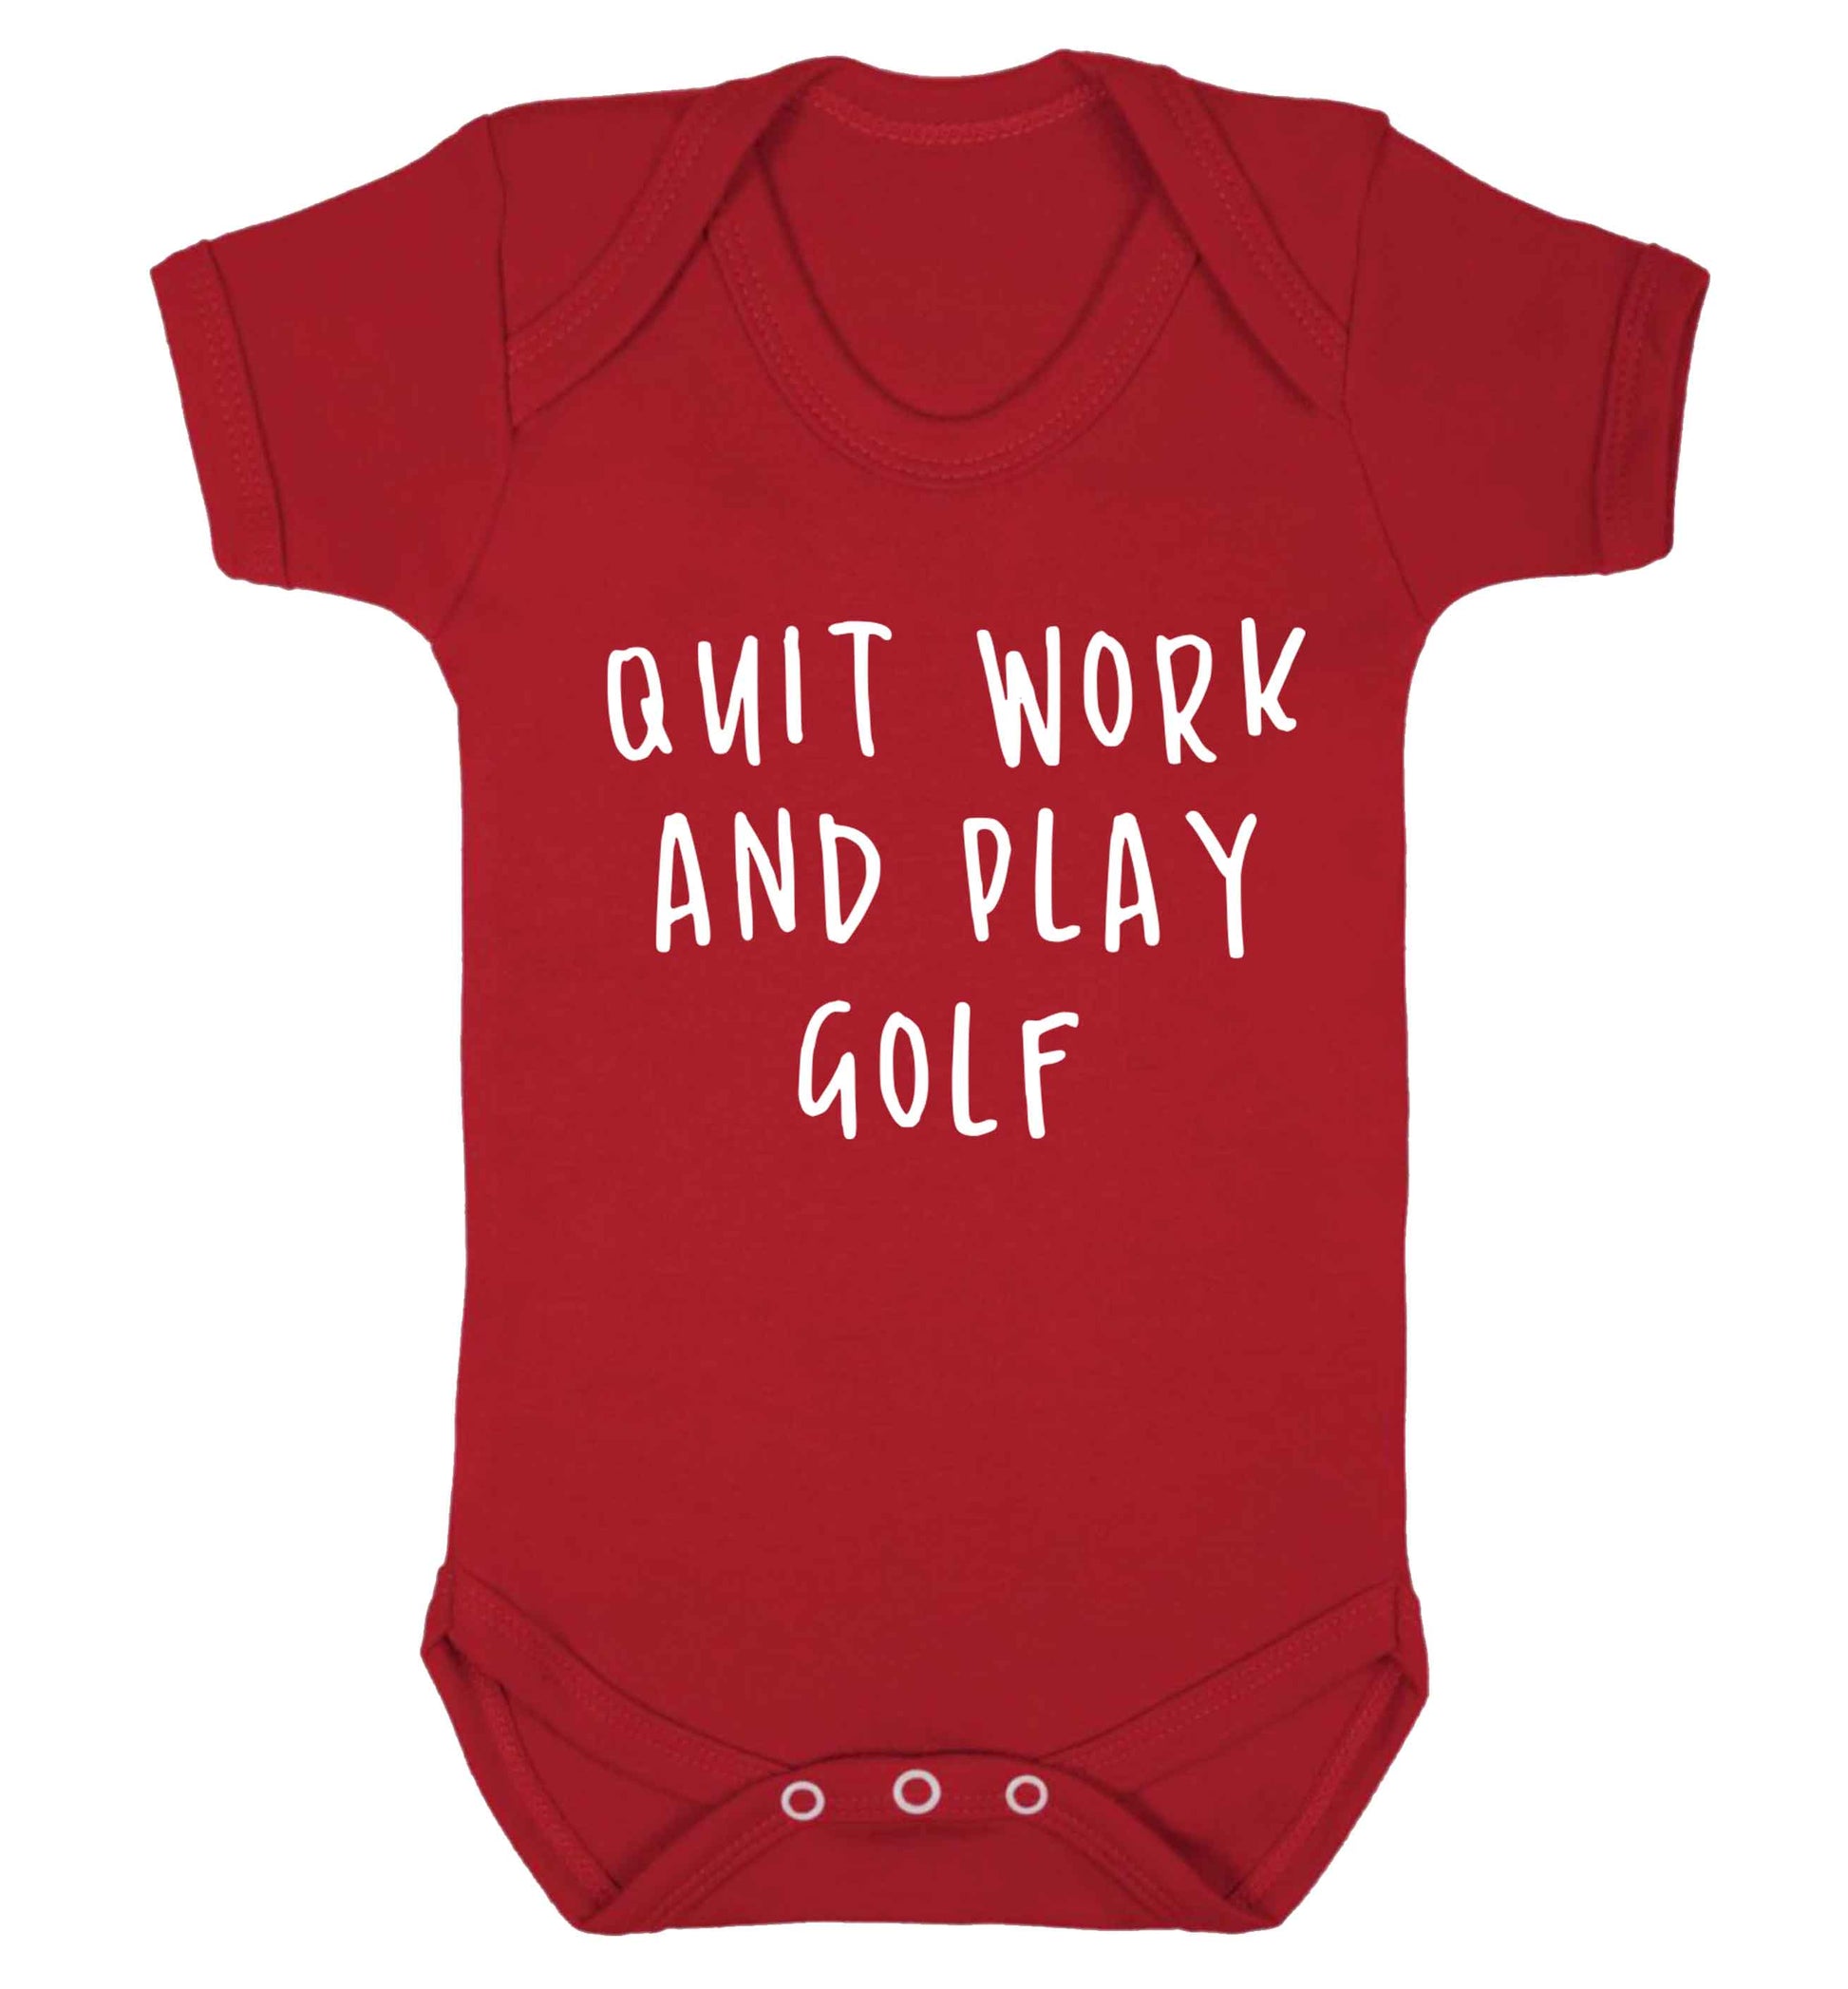 Quit work and play golf Baby Vest red 18-24 months